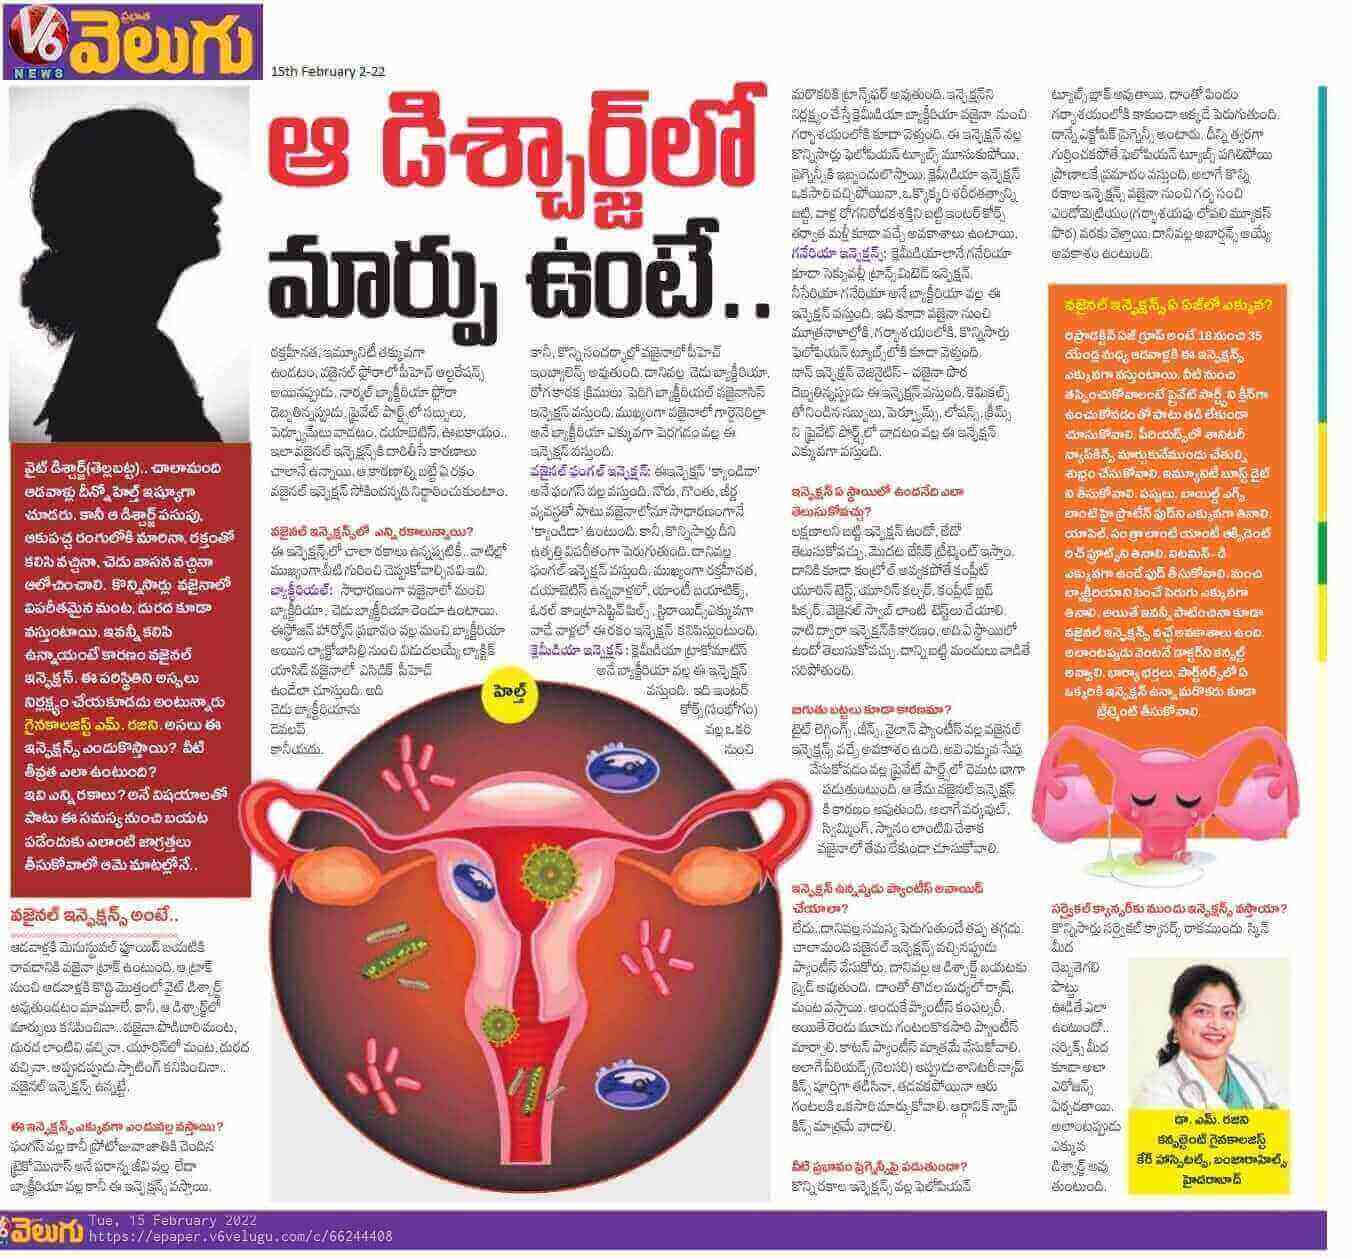 Articles on Gynecological Problems by Dr. Muthineni Rajini - Senior Consultant Obstetrician and Gynecologist, Laparoscopic Surgeon, and Infertility Specialist